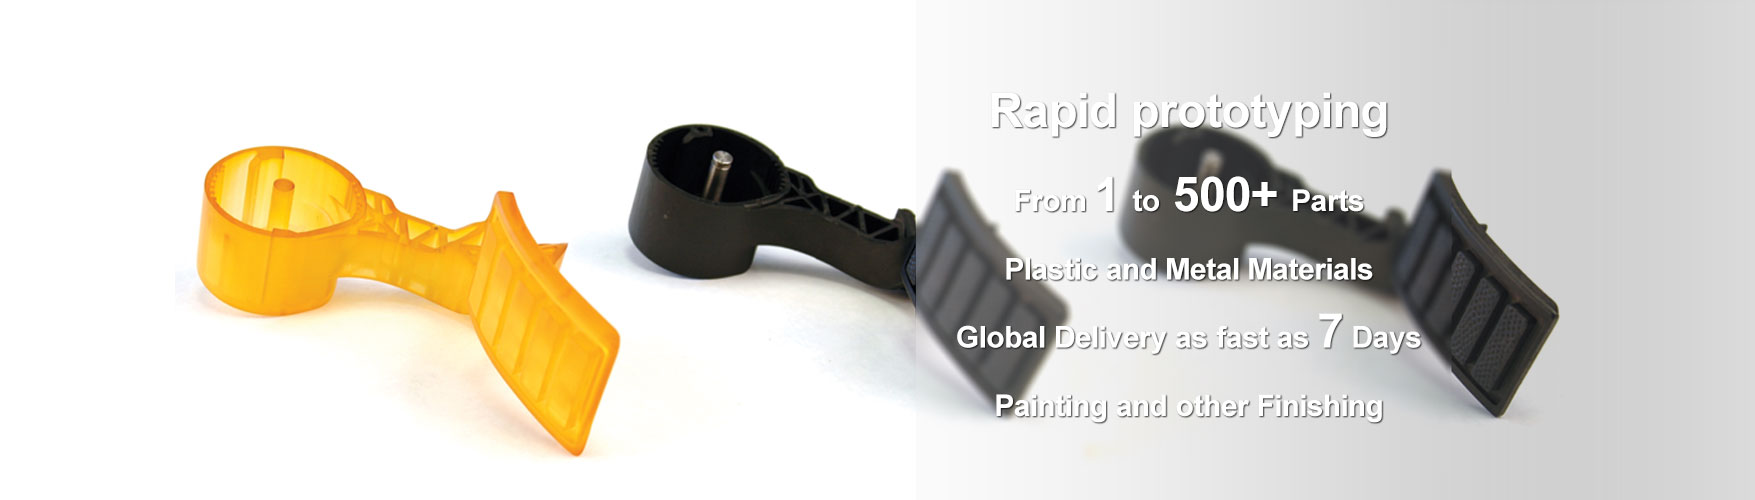 Rapid prototyping From 1 to 500+ Parts Plastic and Metal Materials Global Delivery as fast as 7 Days